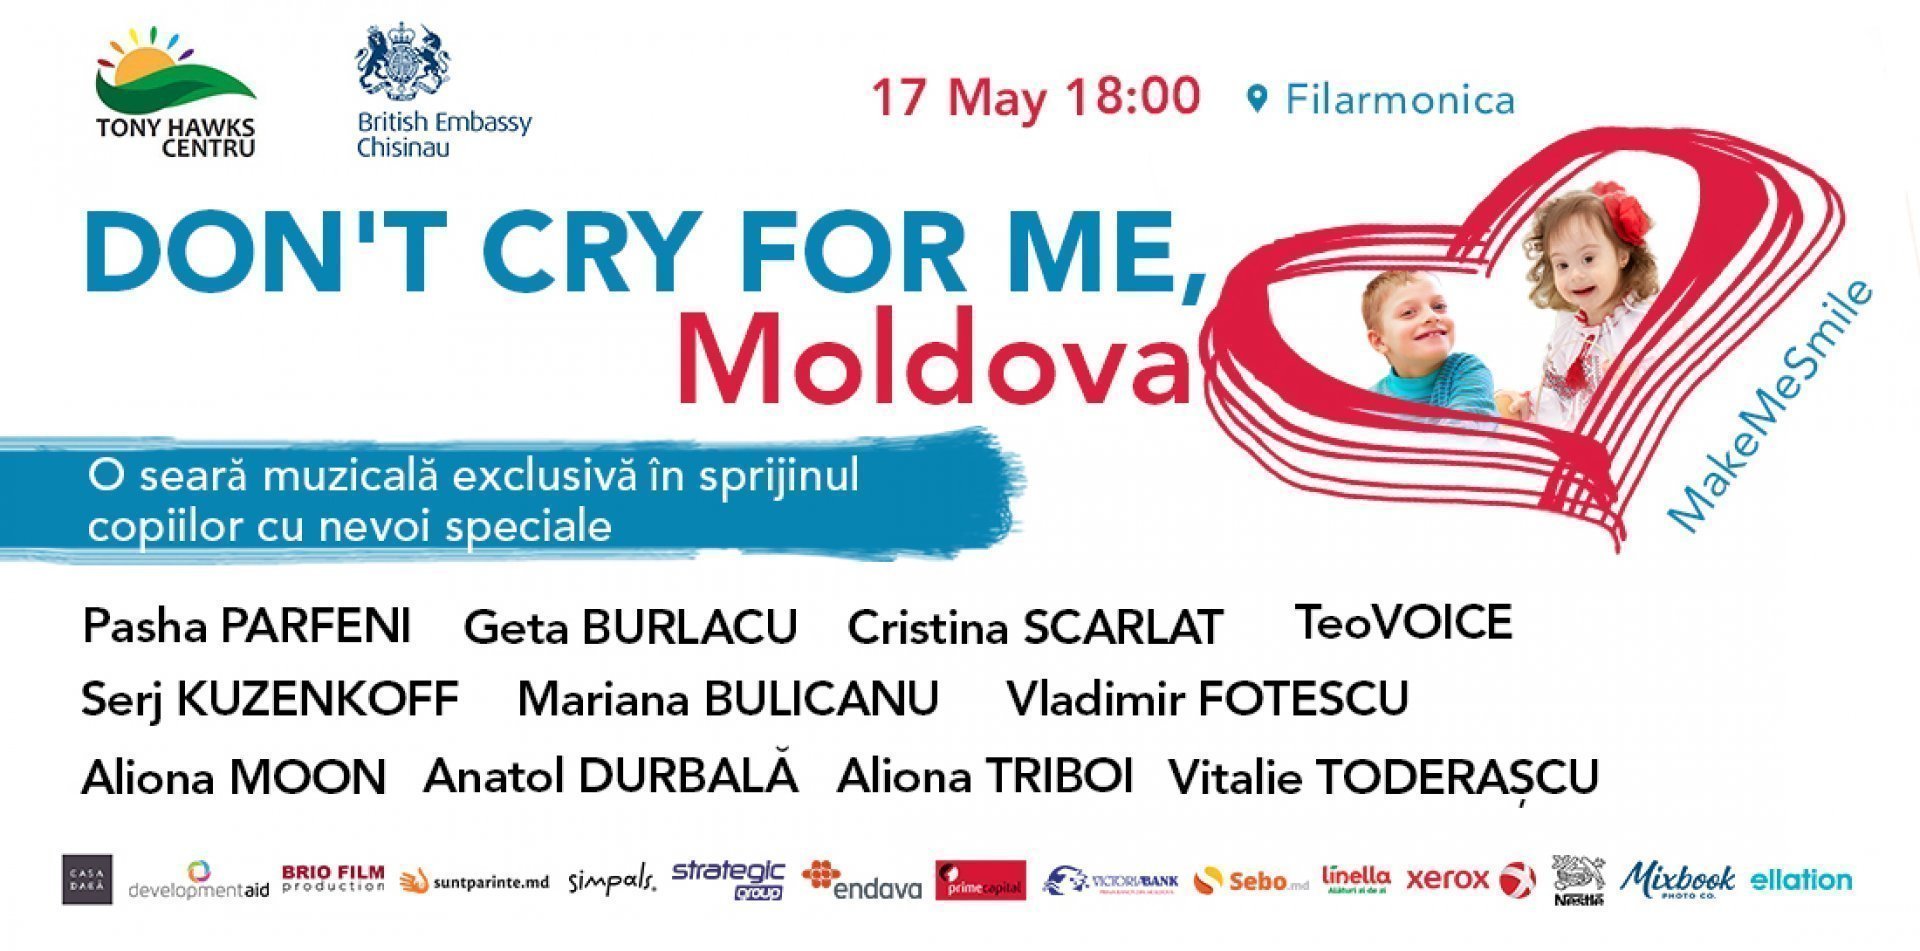 Don't cry for me, Moldova